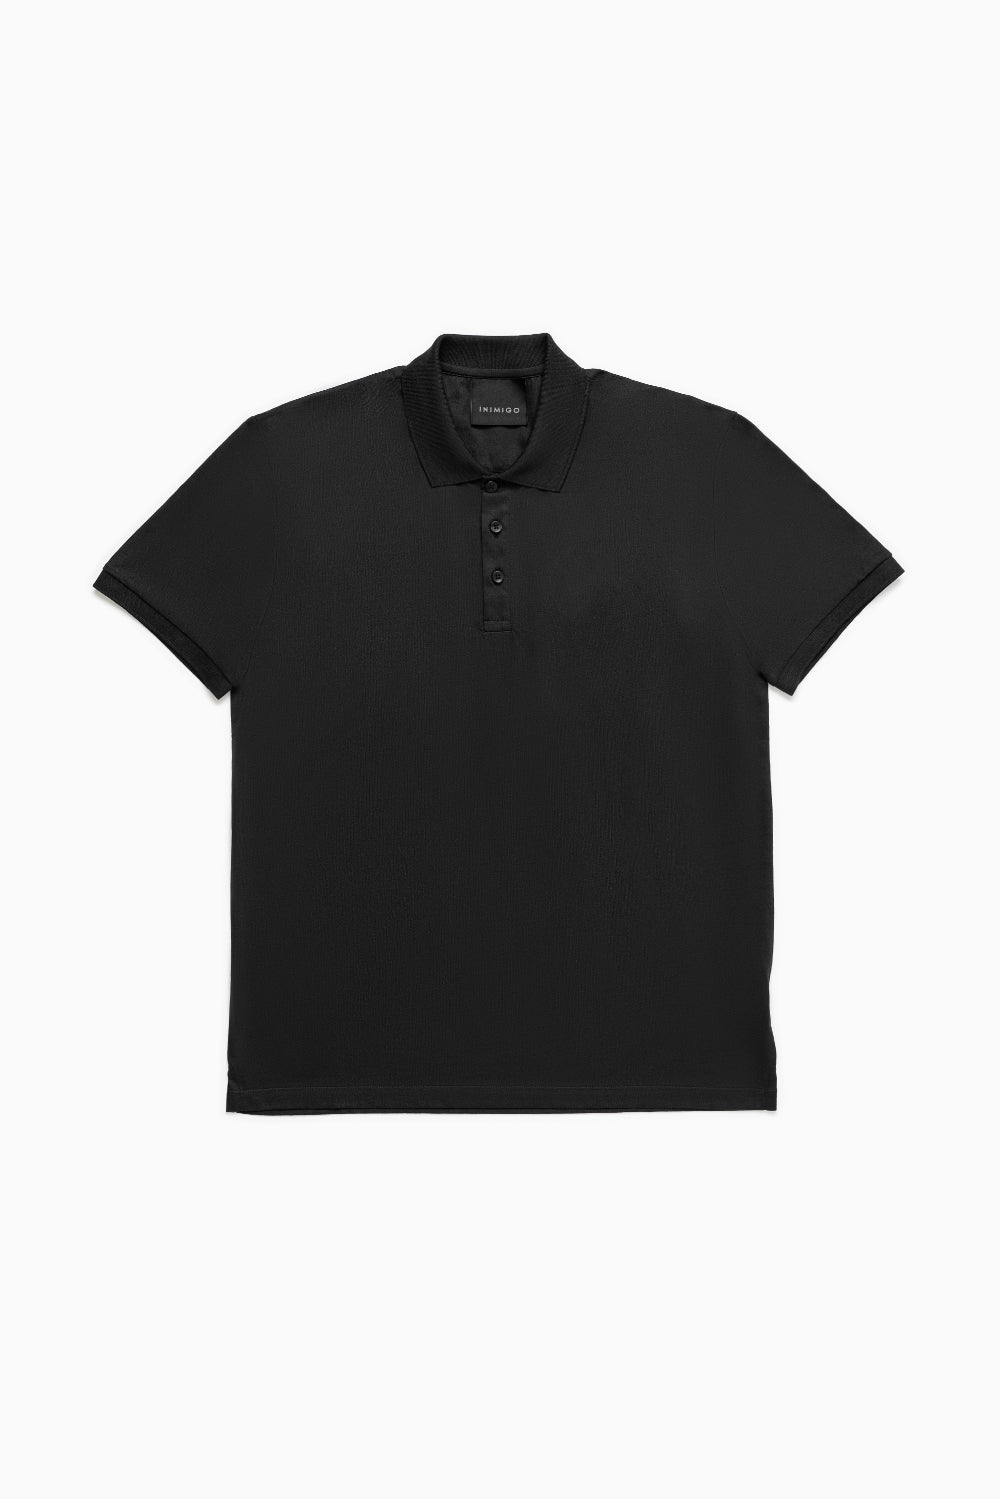 Heart Patch Jersey Black Polo